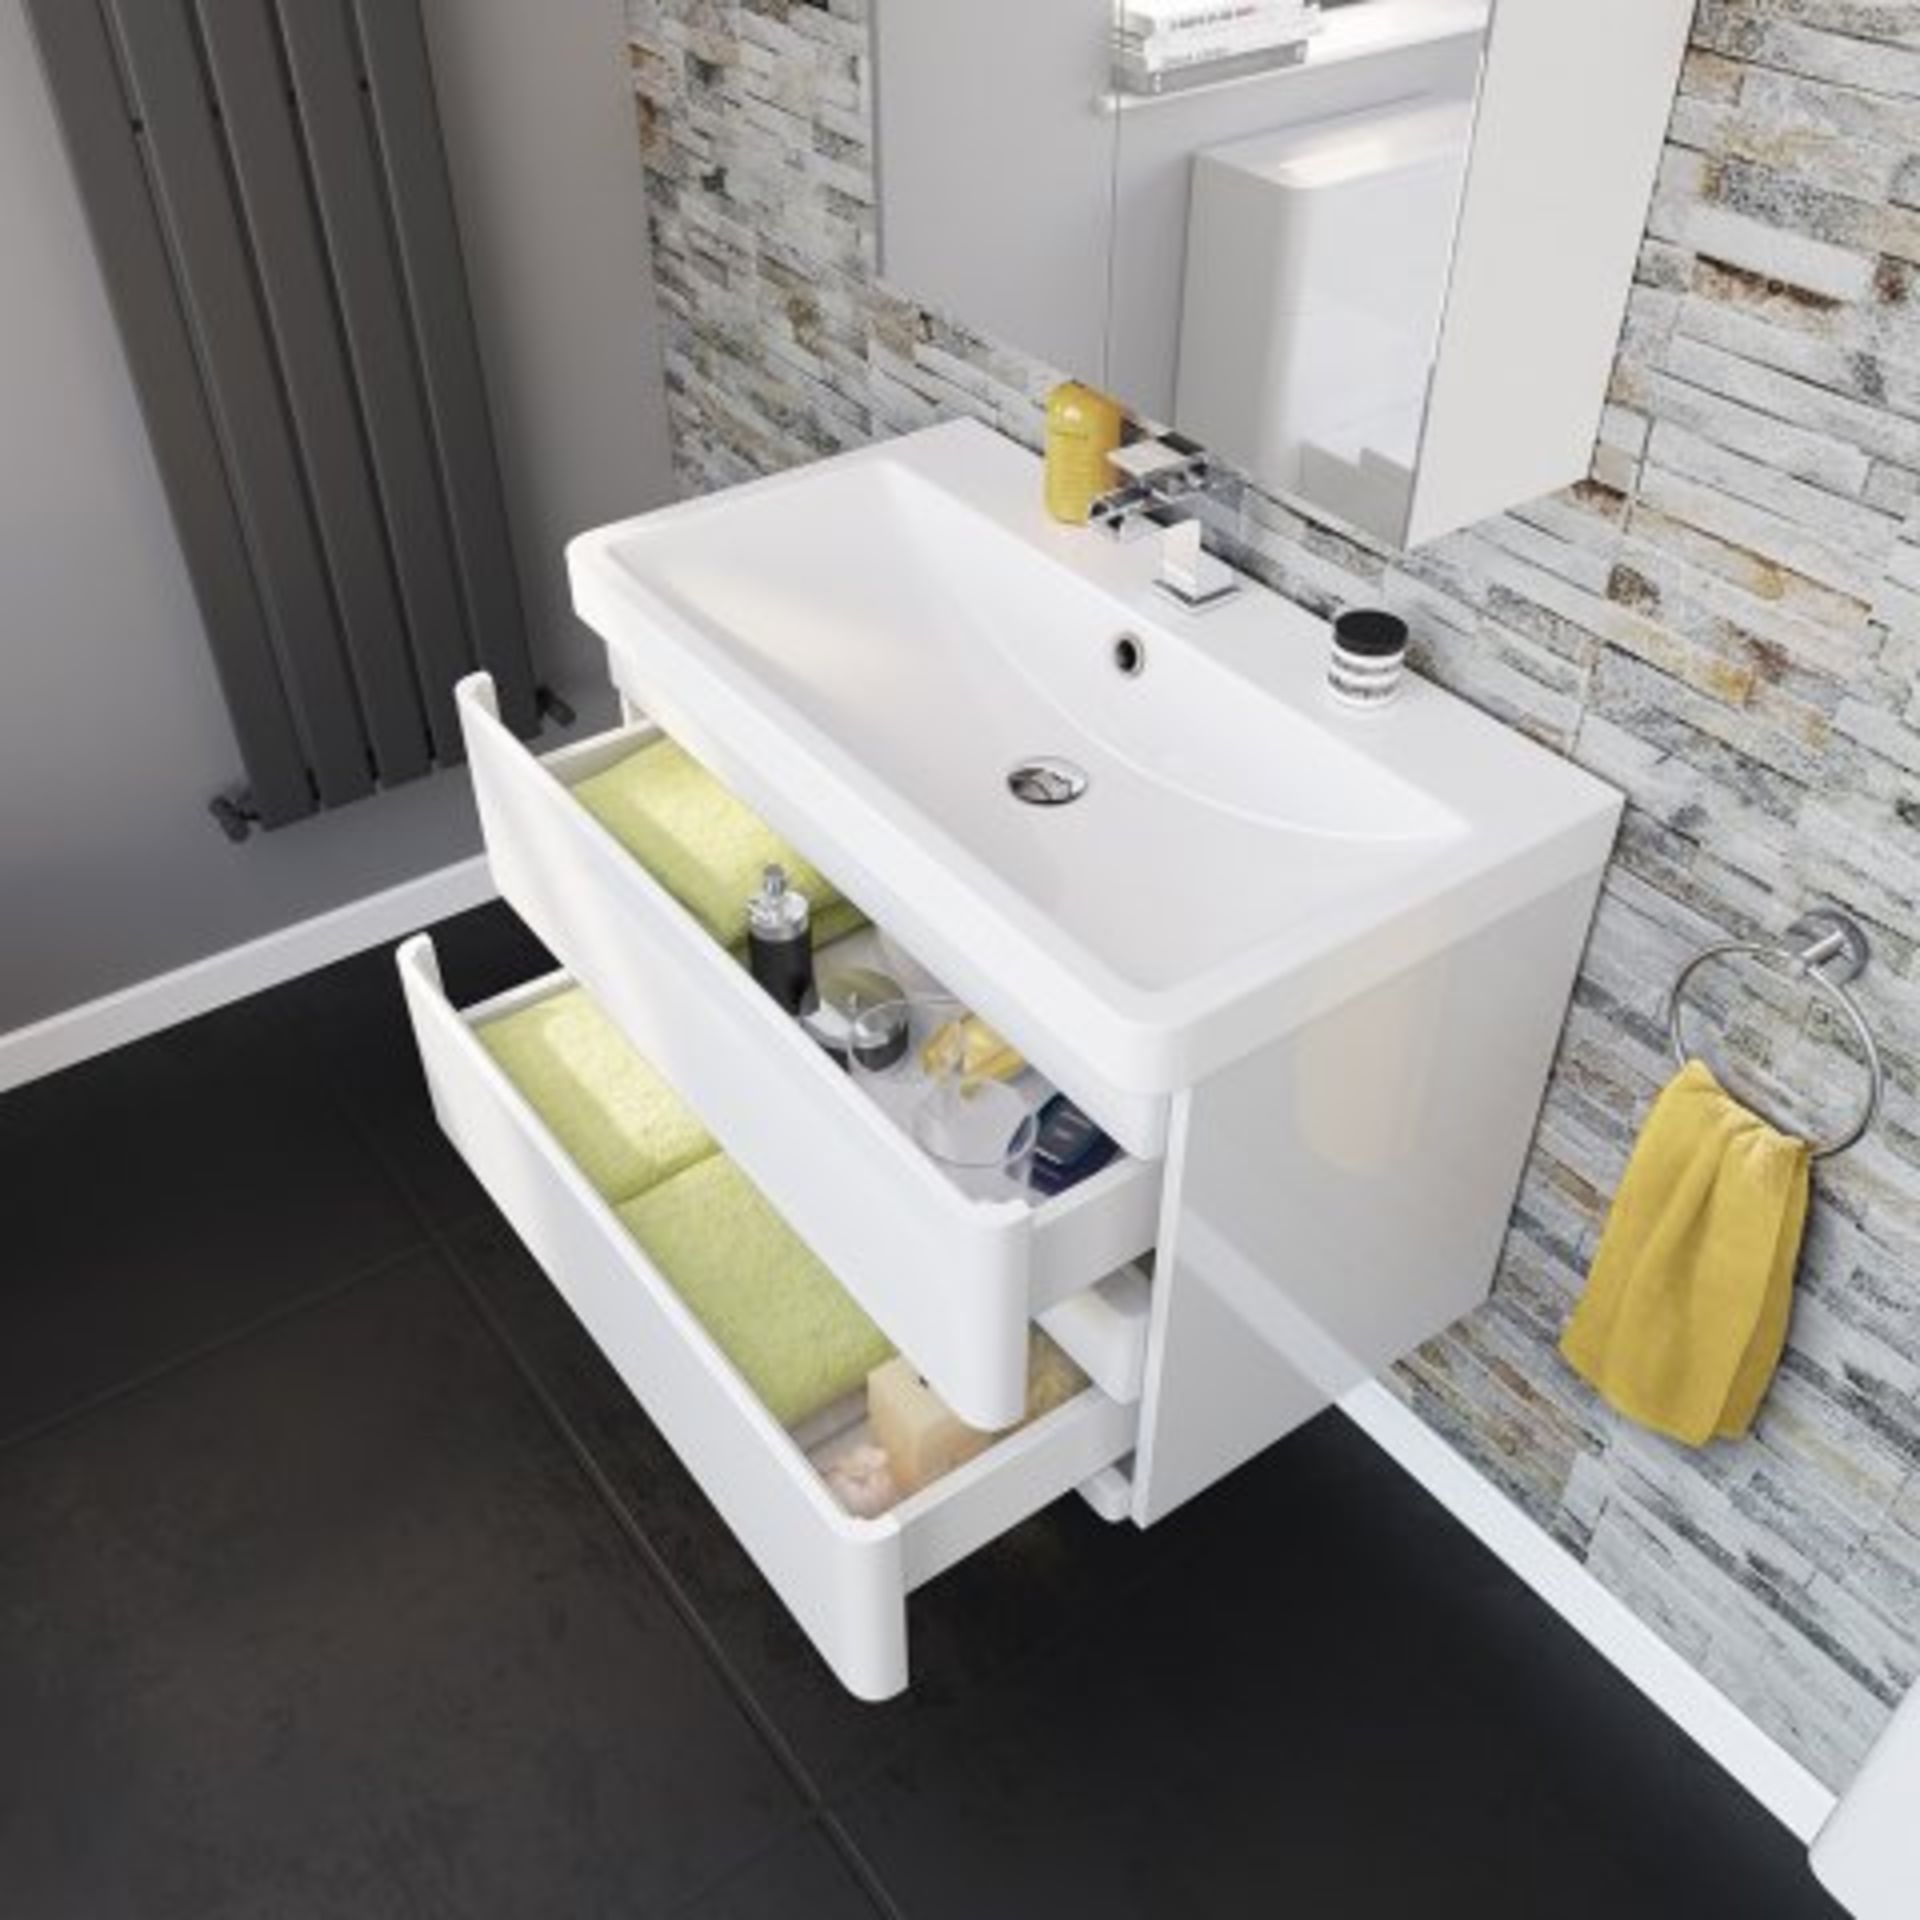 (H17) 800mm Denver II Gloss White Built In Basin Drawer Unit - Wall Hung. RRP £599.99. COMES - Image 2 of 4